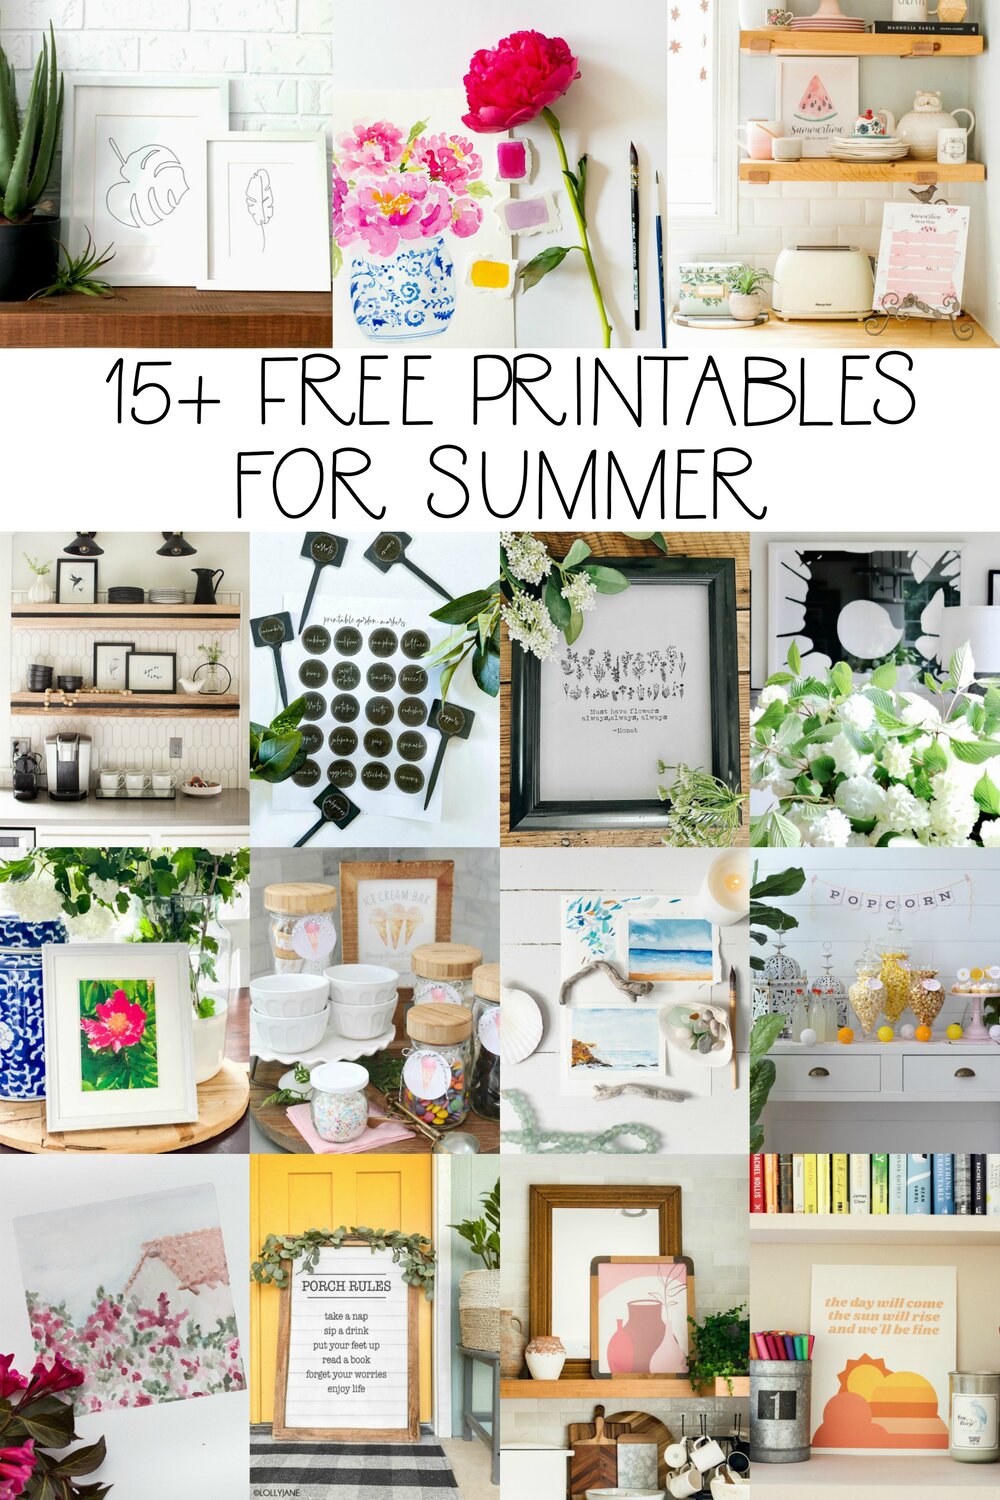 over 15 different free printables ideas for summer.jpg